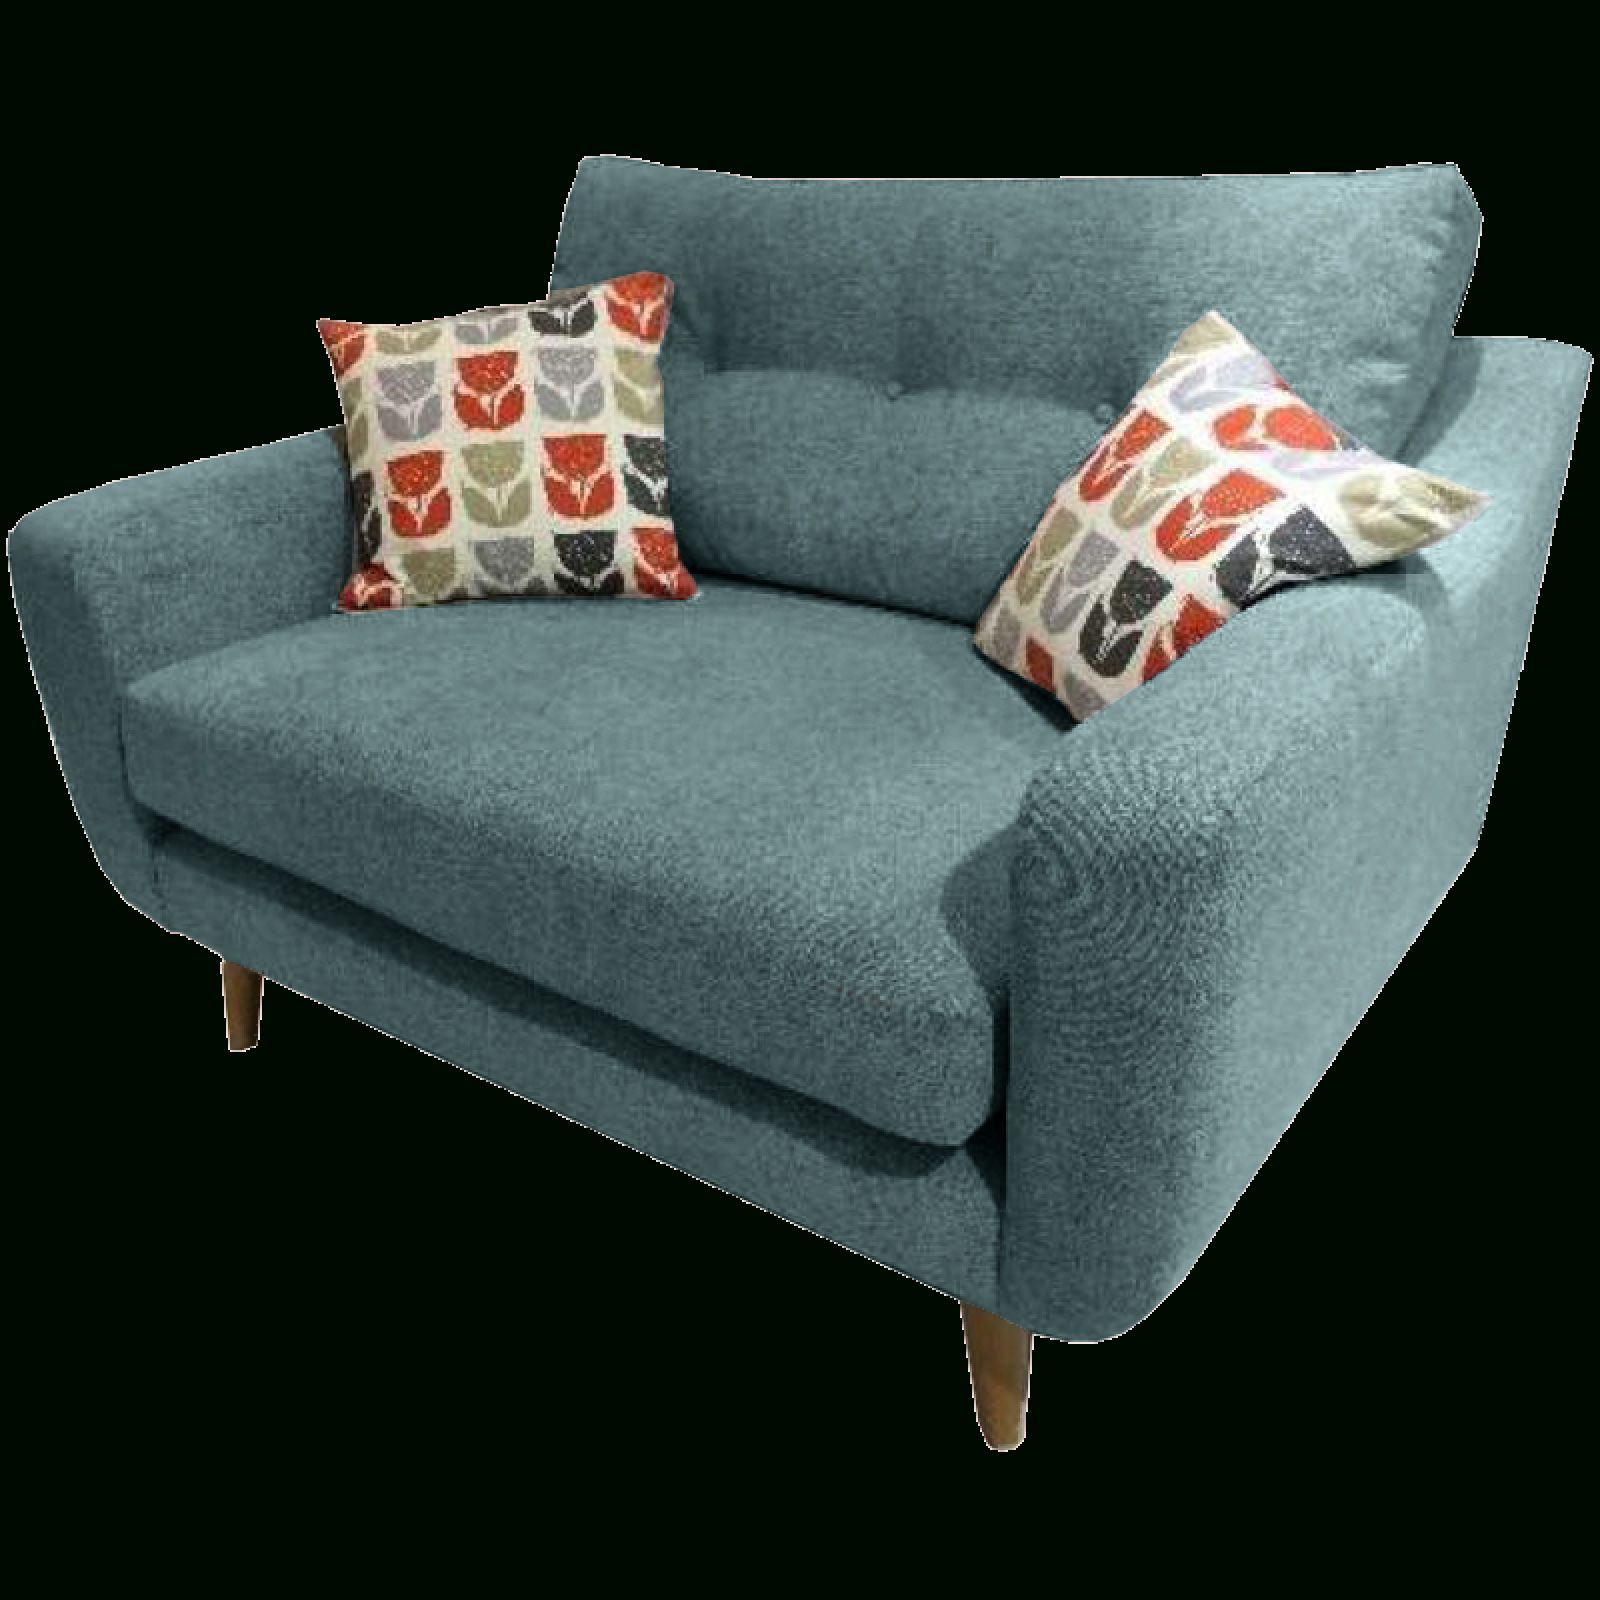 Lisbon Snuggler Sofa Chairwhitemeadow With 4pc French Seamed Sectional Sofas Oblong Mustard (View 5 of 15)